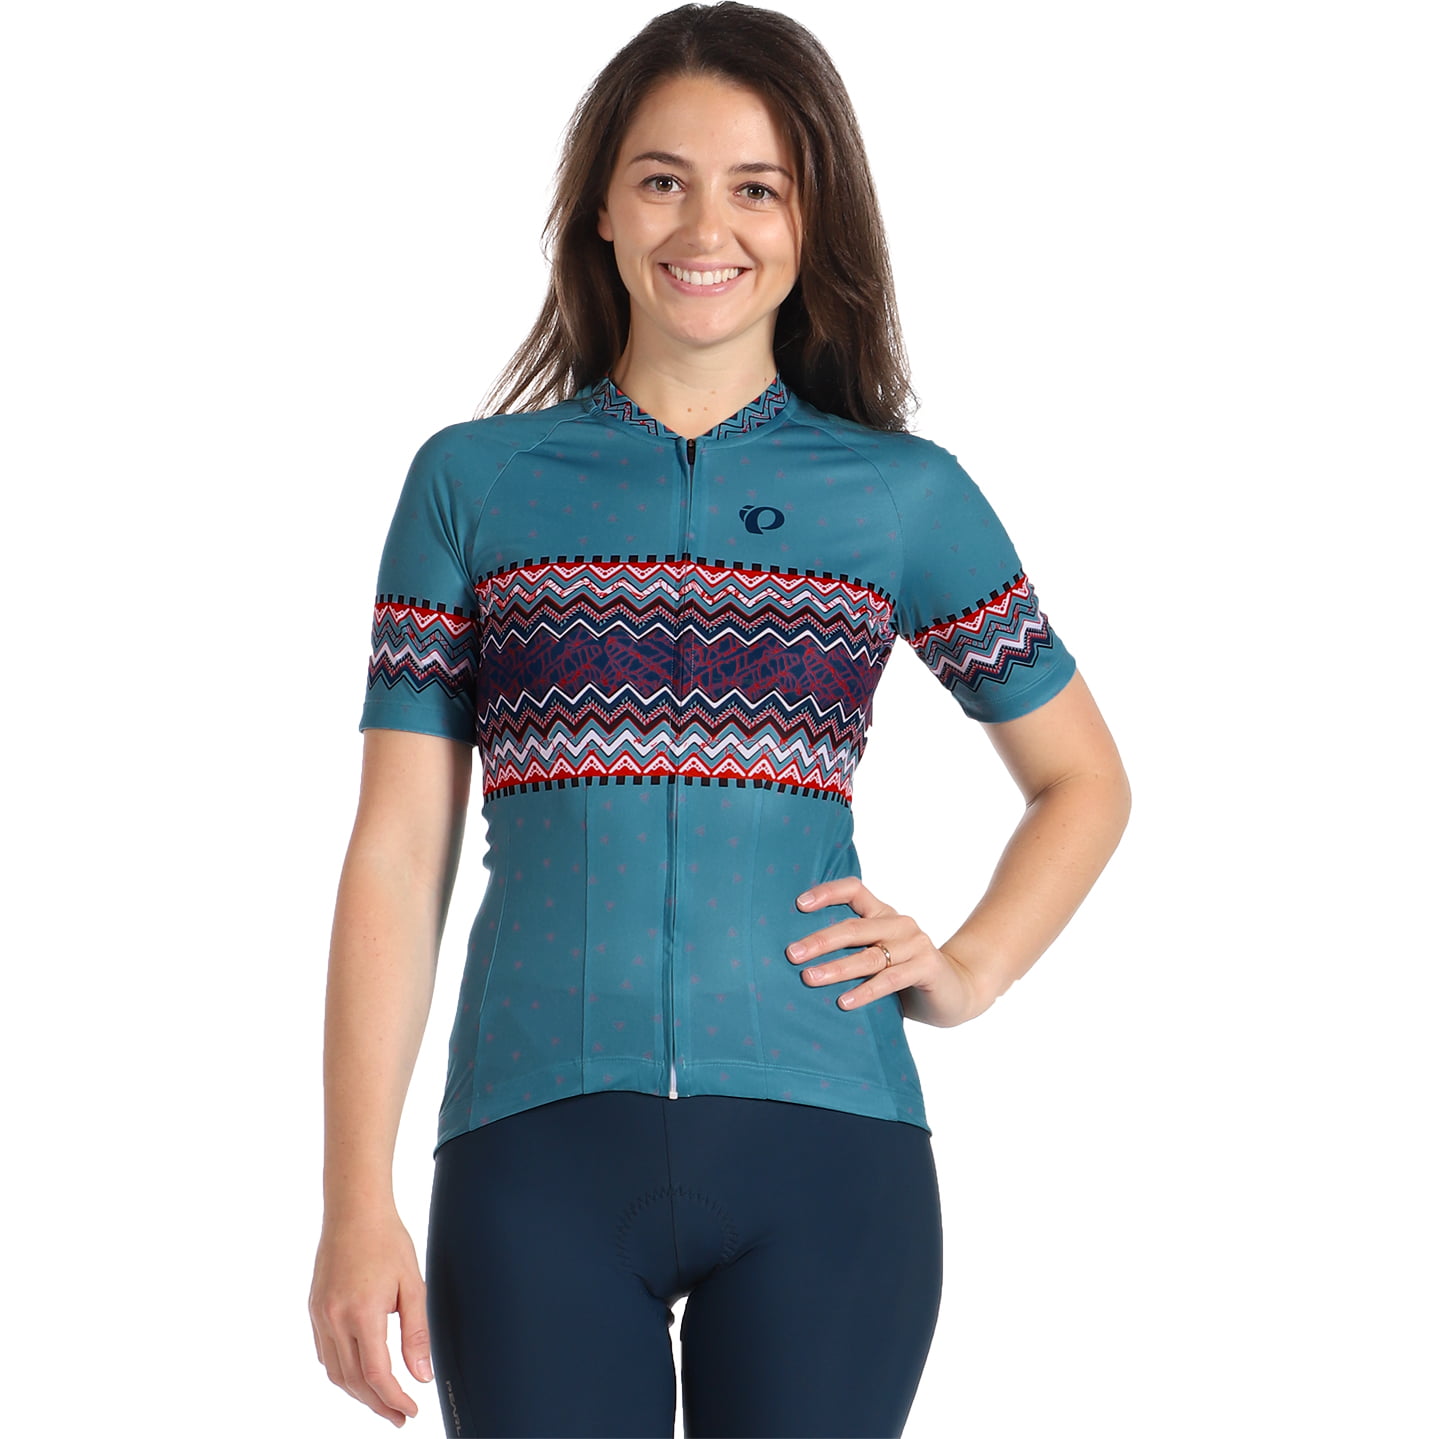 PEARL IZUMI Attack Women’s Jersey Women’s Short Sleeve Jersey, size S, Cycling jersey, Cycle gear